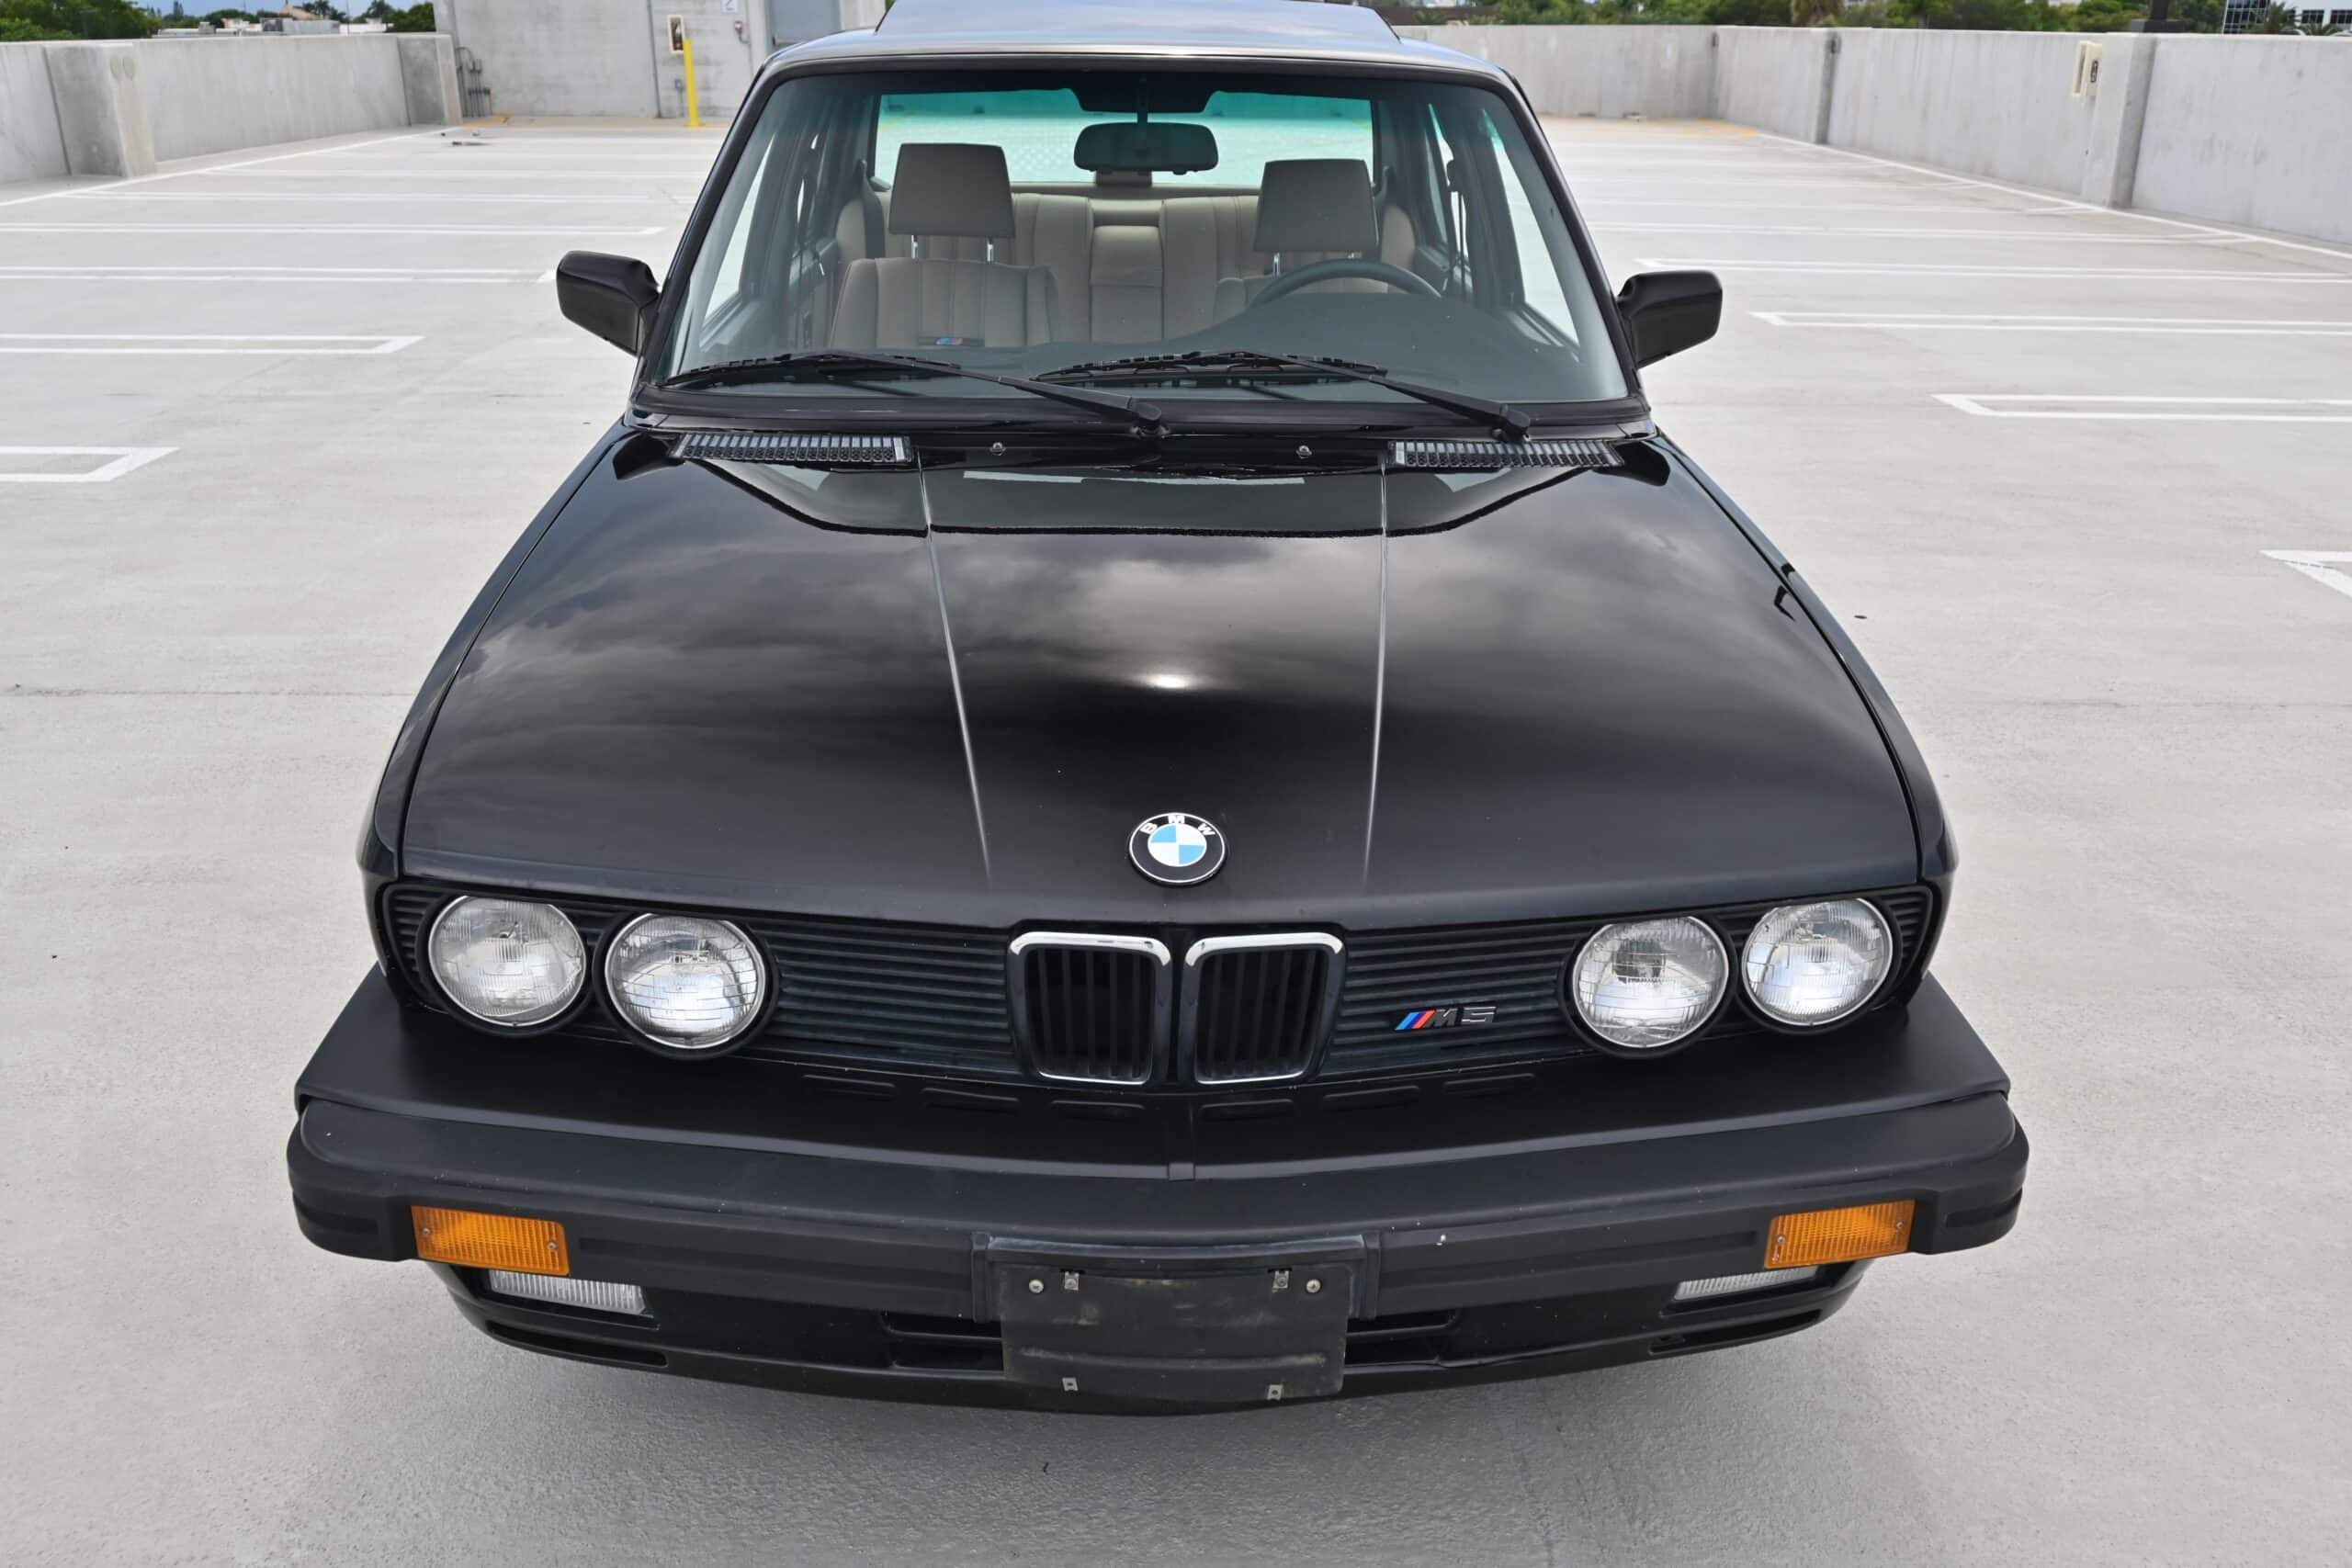 1988 BMW M5 Original Paint / Stock / 1 owner for 30 years / Handbuilt 1 of 1340 US Cars